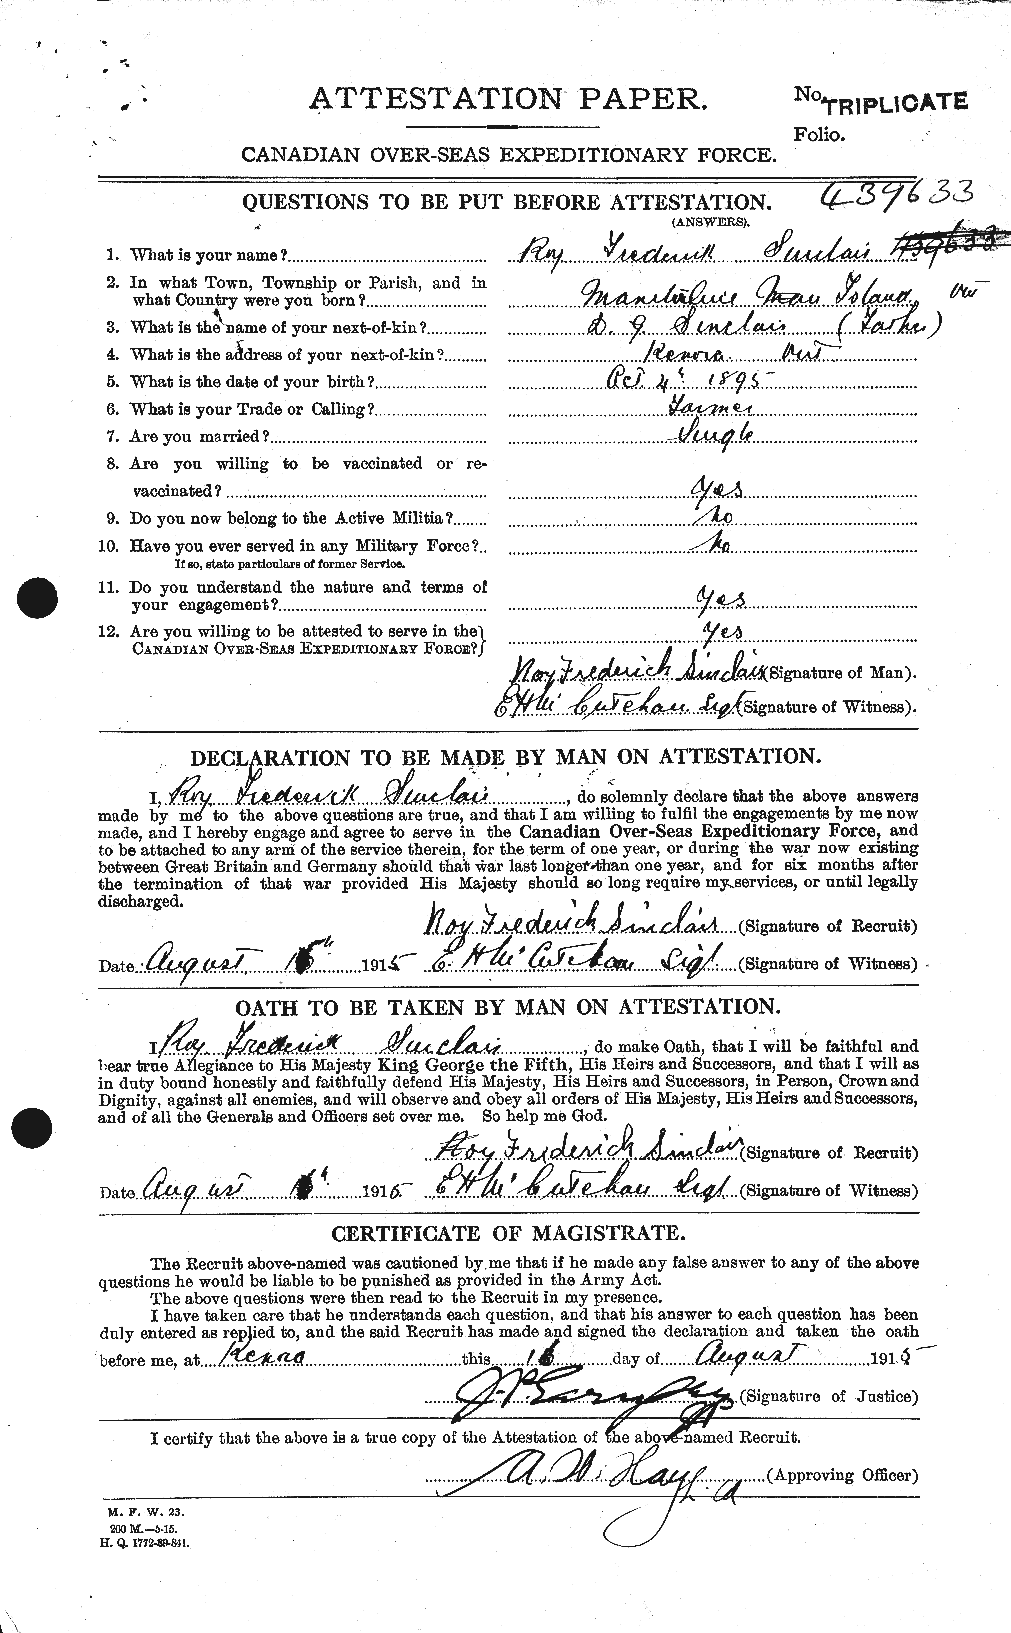 Personnel Records of the First World War - CEF 101910a